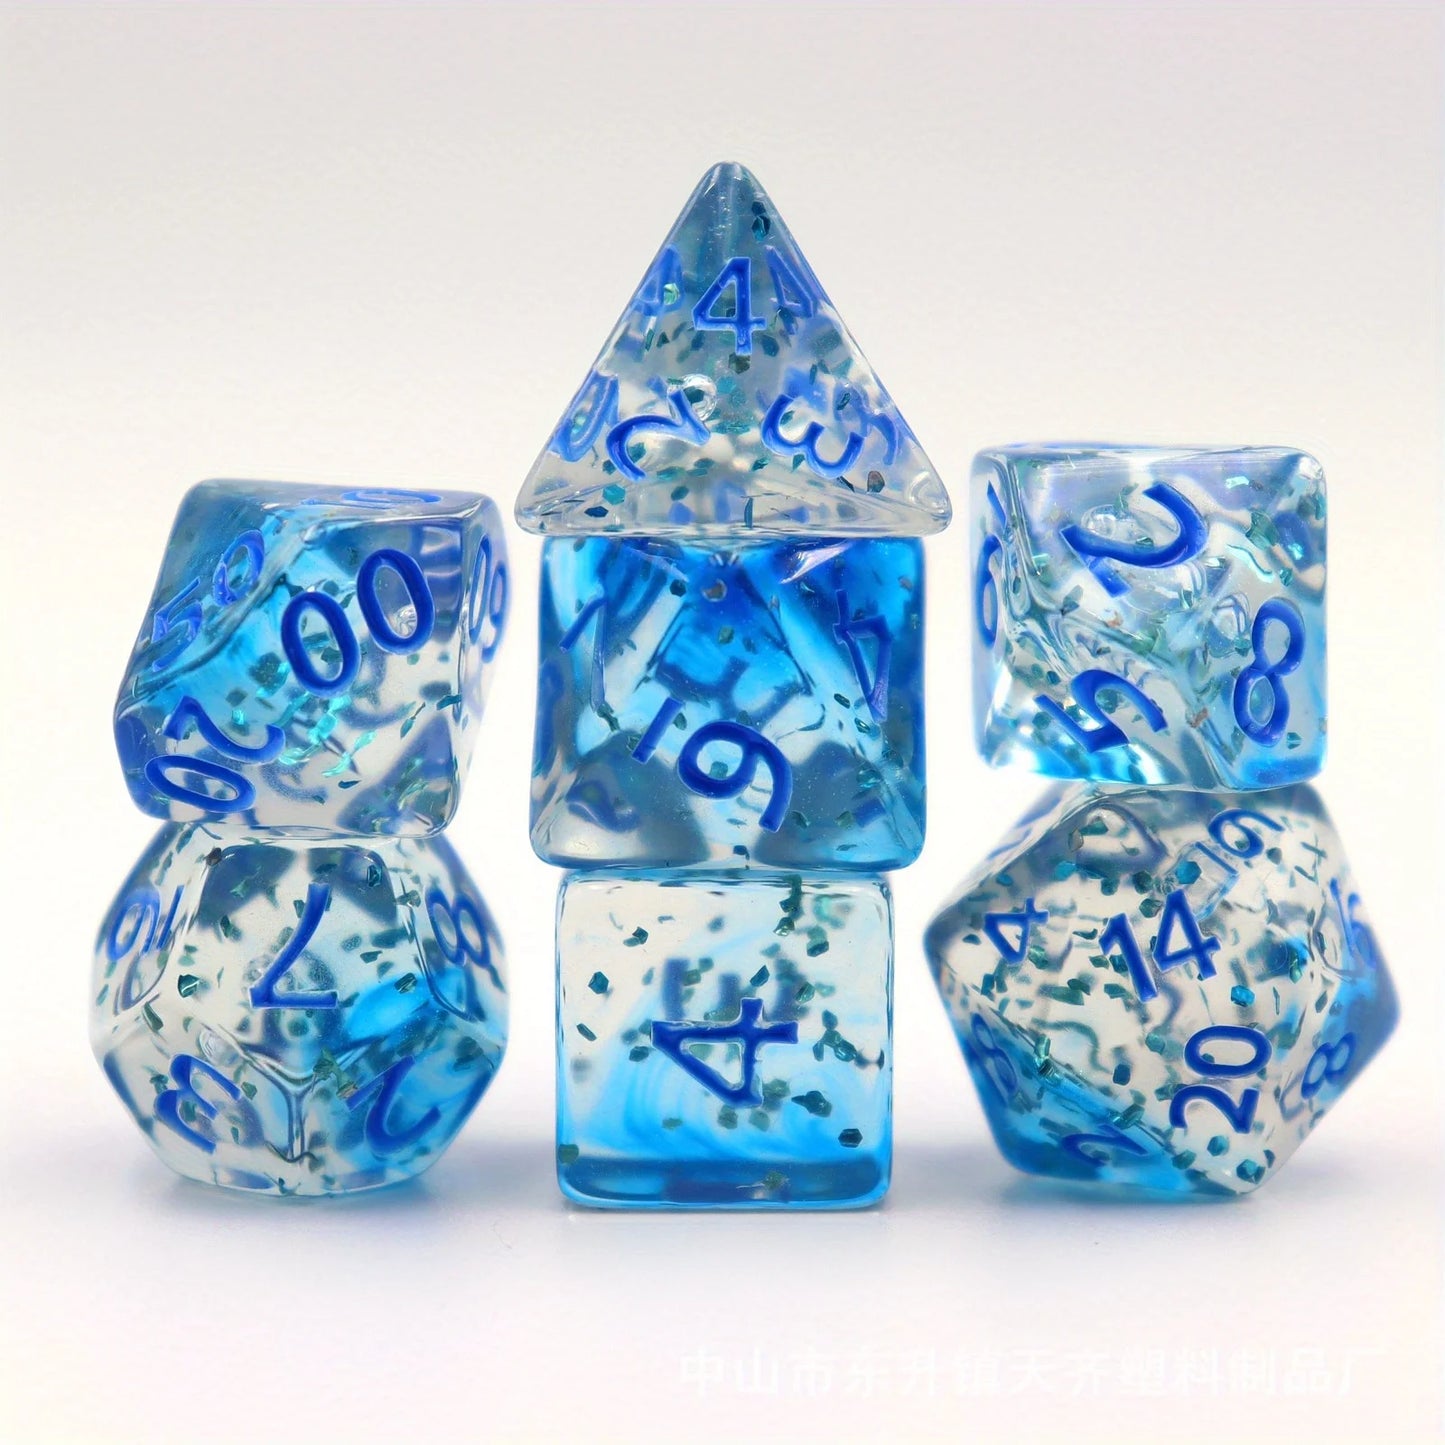 7pcs Set Crystal Style DND Dice Set, Polyhedral Table Game Dice Role-Playing RPG Dice With Box Blue